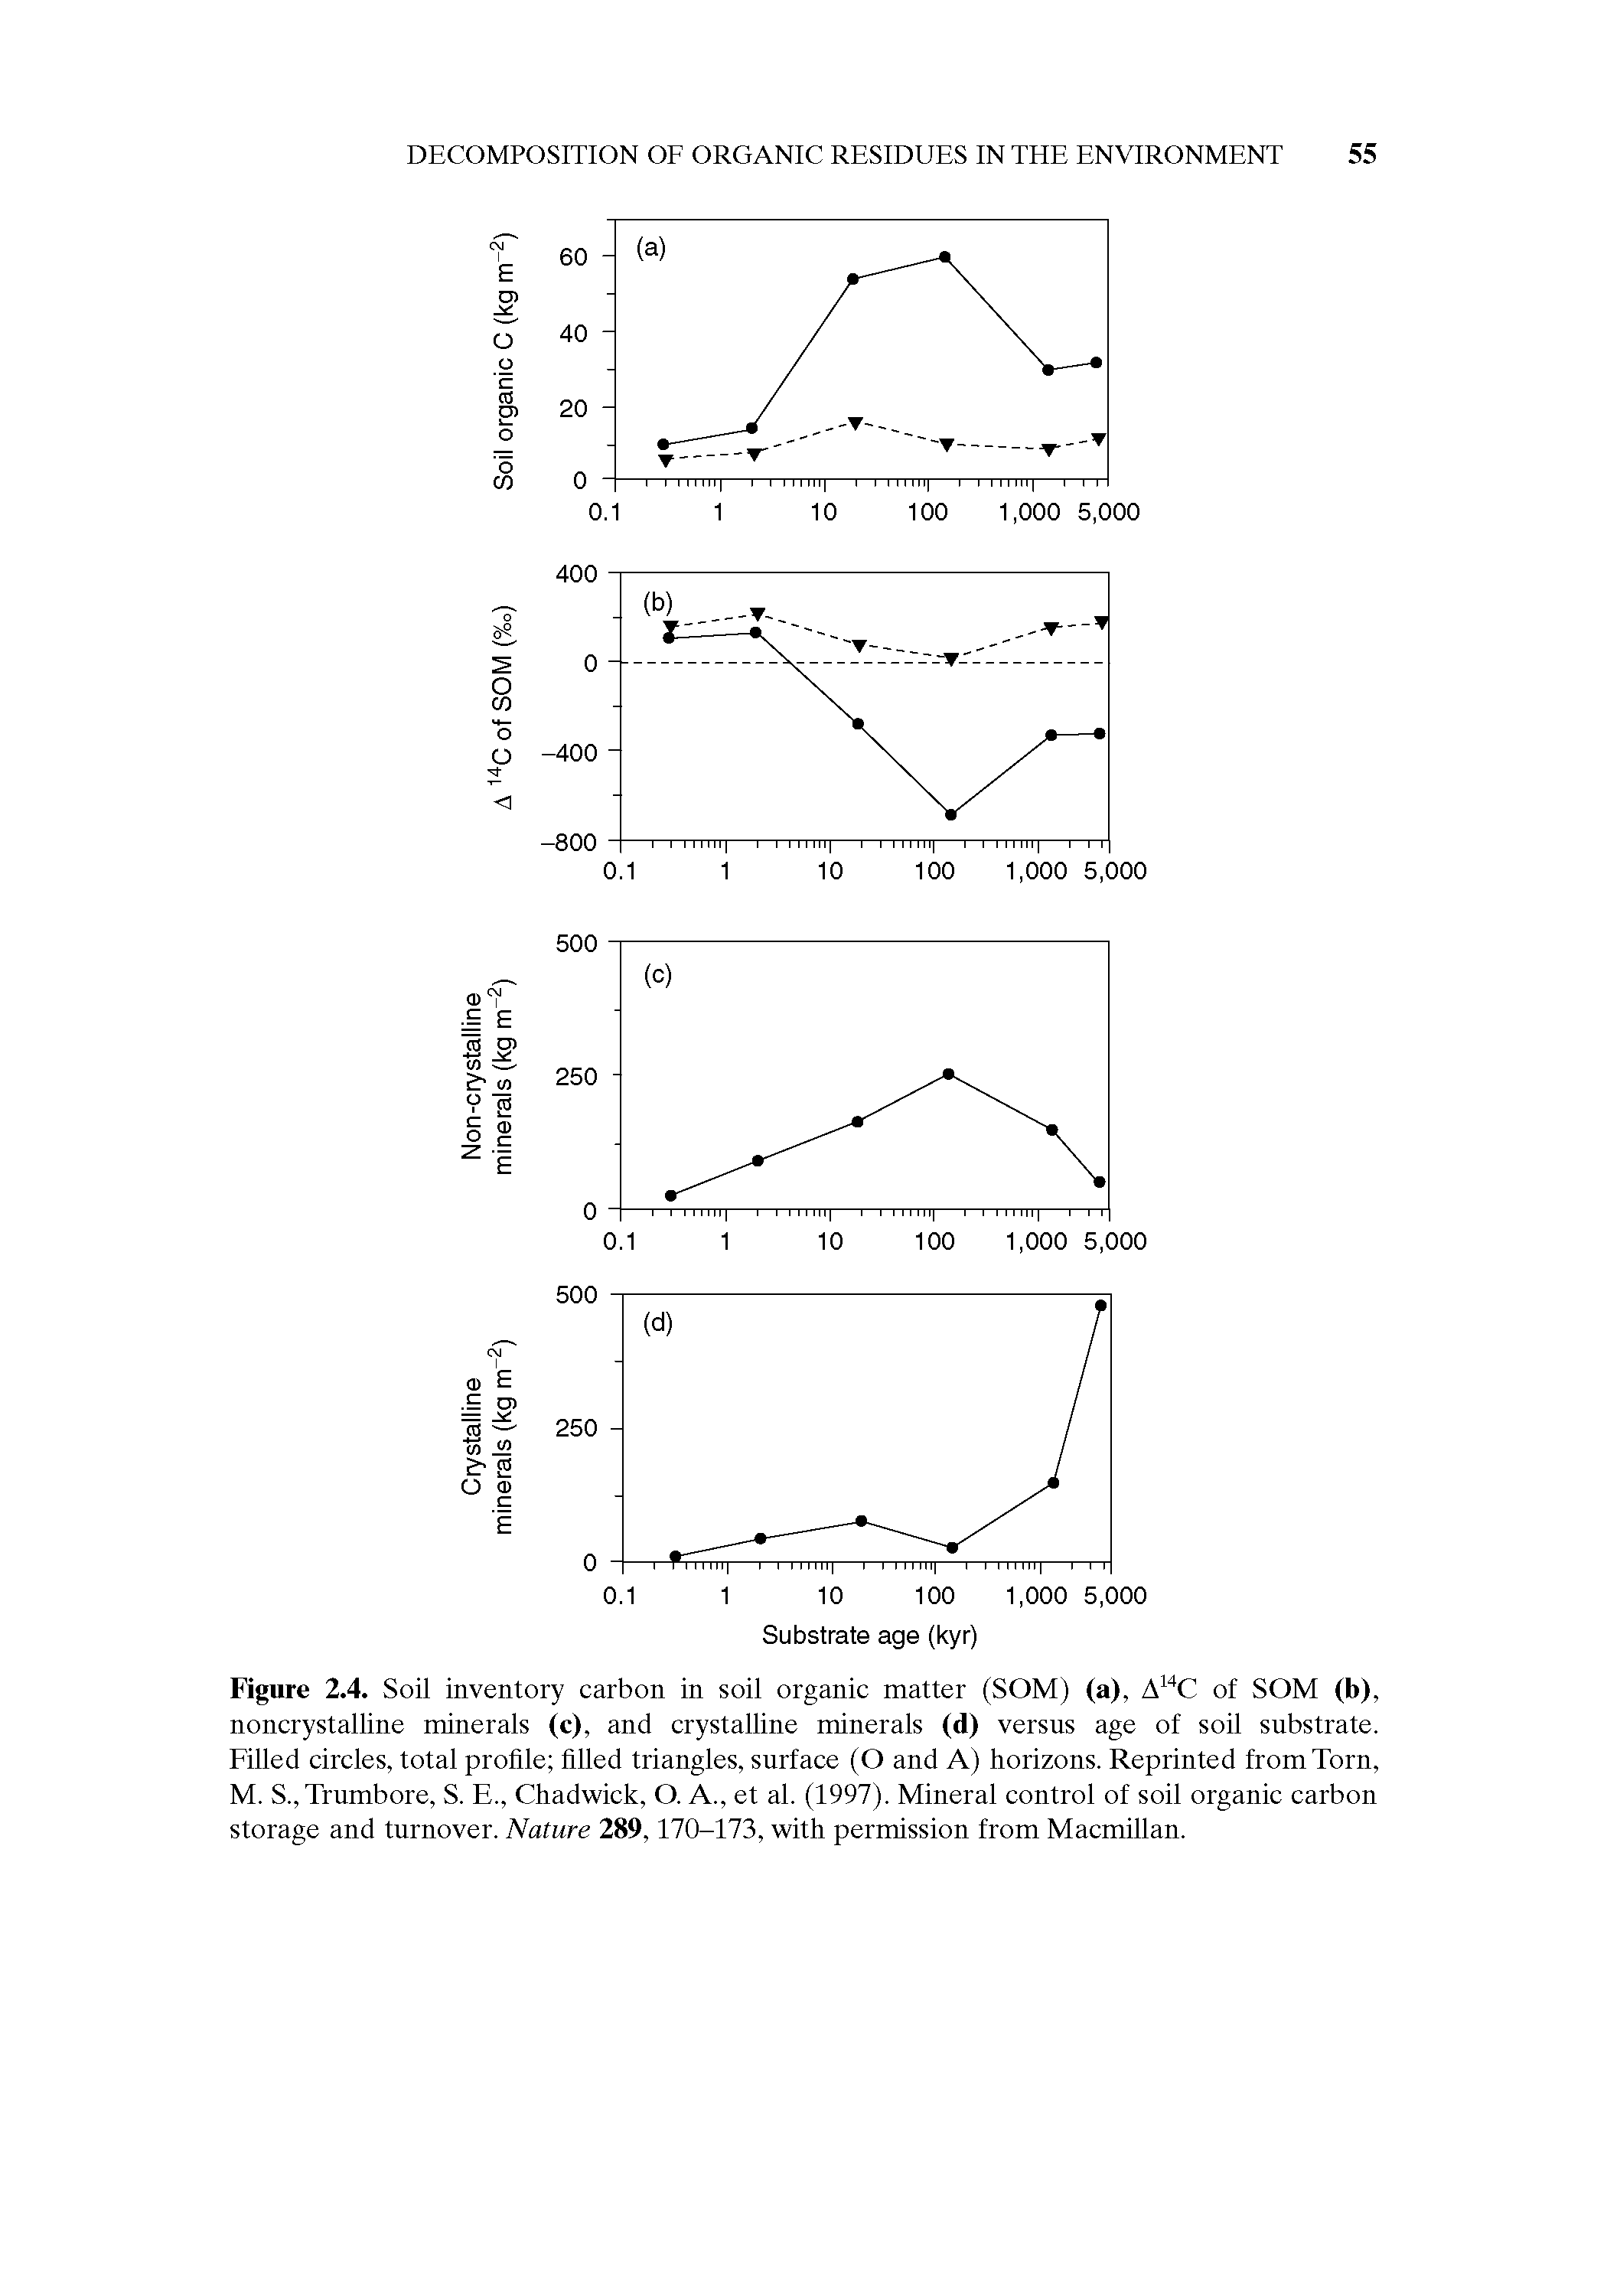 Figure 2.4. Soil inventory carbon in soil organic matter (SOM) (a), A14C of SOM (b), noncrystalline minerals (c), and crystalline minerals (d) versus age of soil substrate. Filled circles, total profile filled triangles, surface (O and A) horizons. Reprinted from Torn, M. S.,Trumbore, S. E., Chadwick, O. A., et al. (1997). Mineral control of soil organic carbon storage and turnover. Nature 289,170-173, with permission from Macmillan.